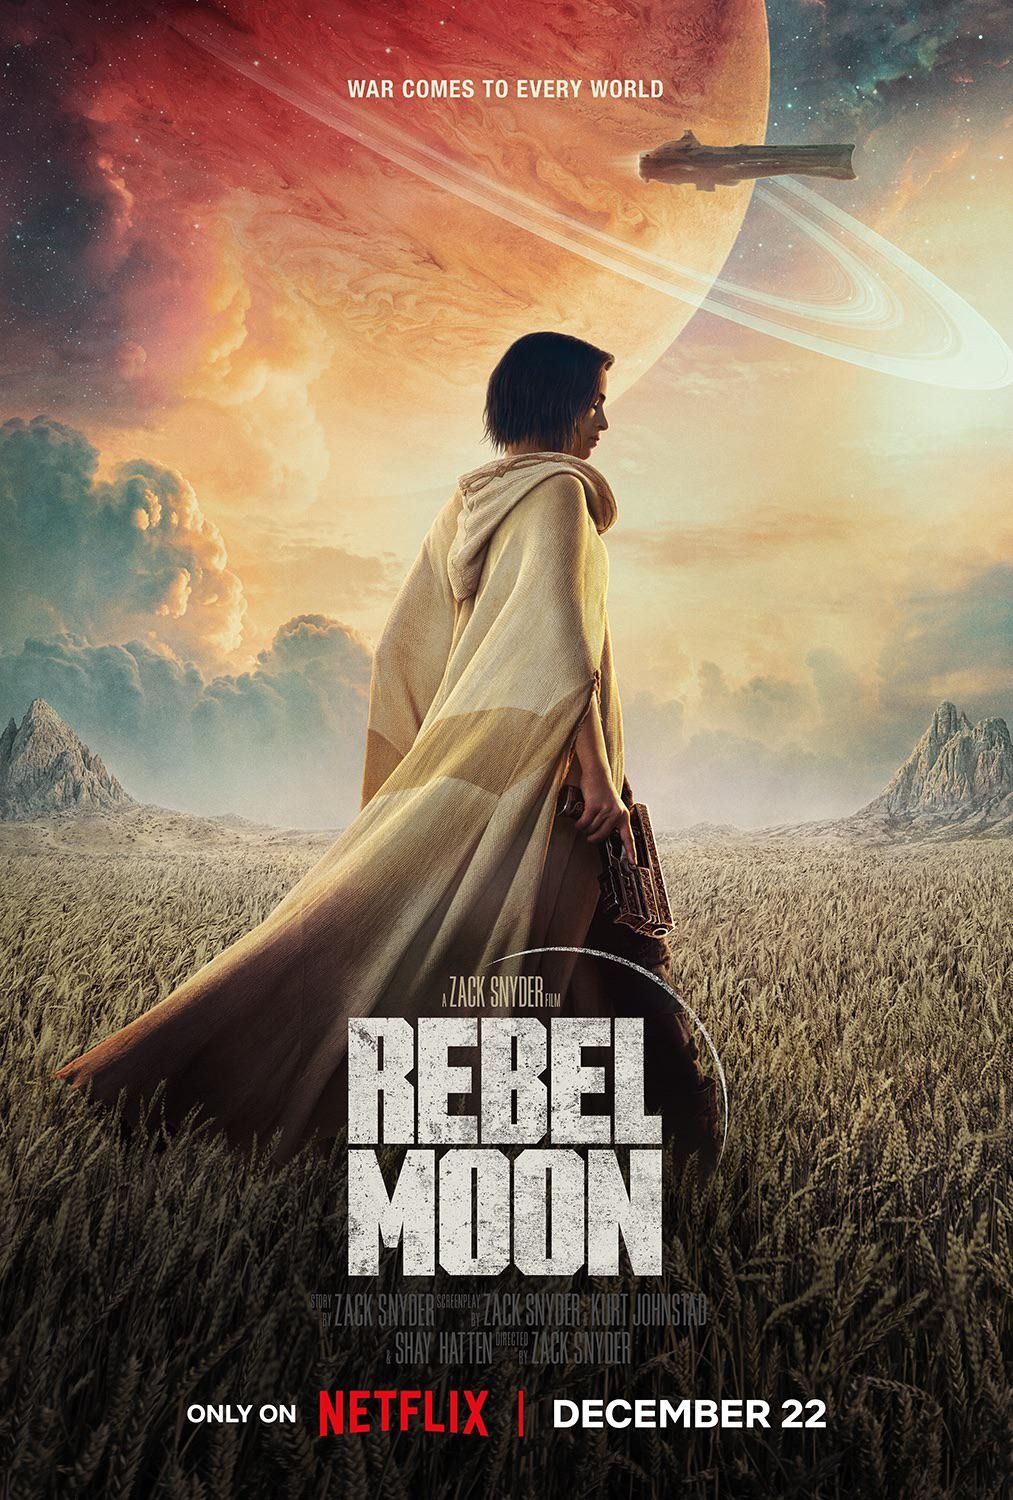 Sammon News on X: Sunday's showcase of 'NETFLIX GEEKED WEEK' is now live!  It's Rebel Moon Day so stay tuned for news and updates on the upcoming Zack  Snyder Film. #NetflixGeeked #NetflixGeekedWeek #